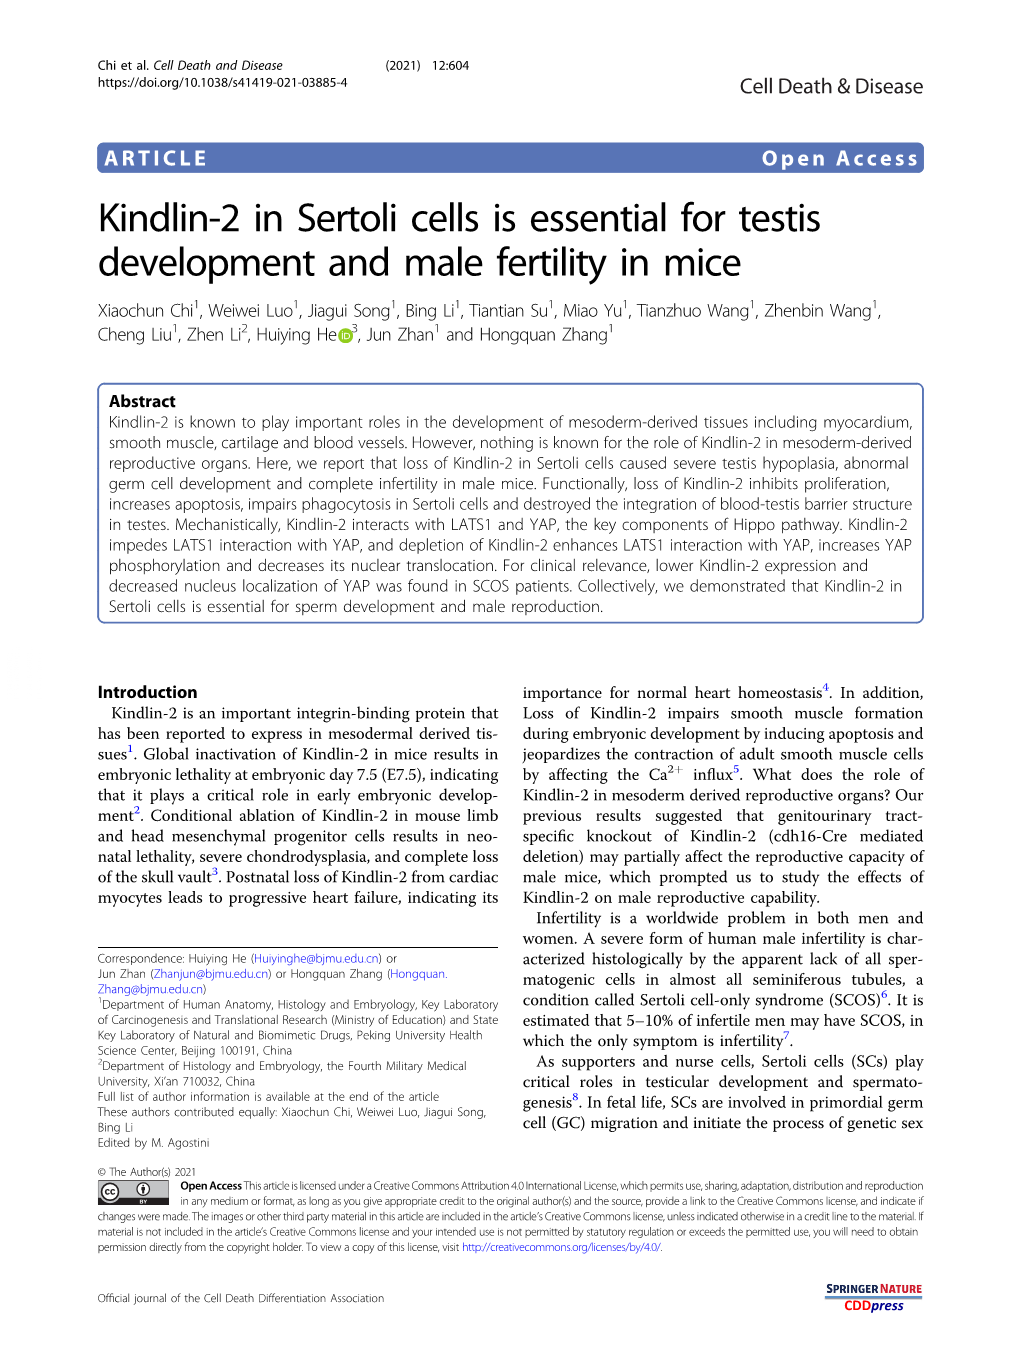 Kindlin-2 in Sertoli Cells Is Essential for Testis Development and Male